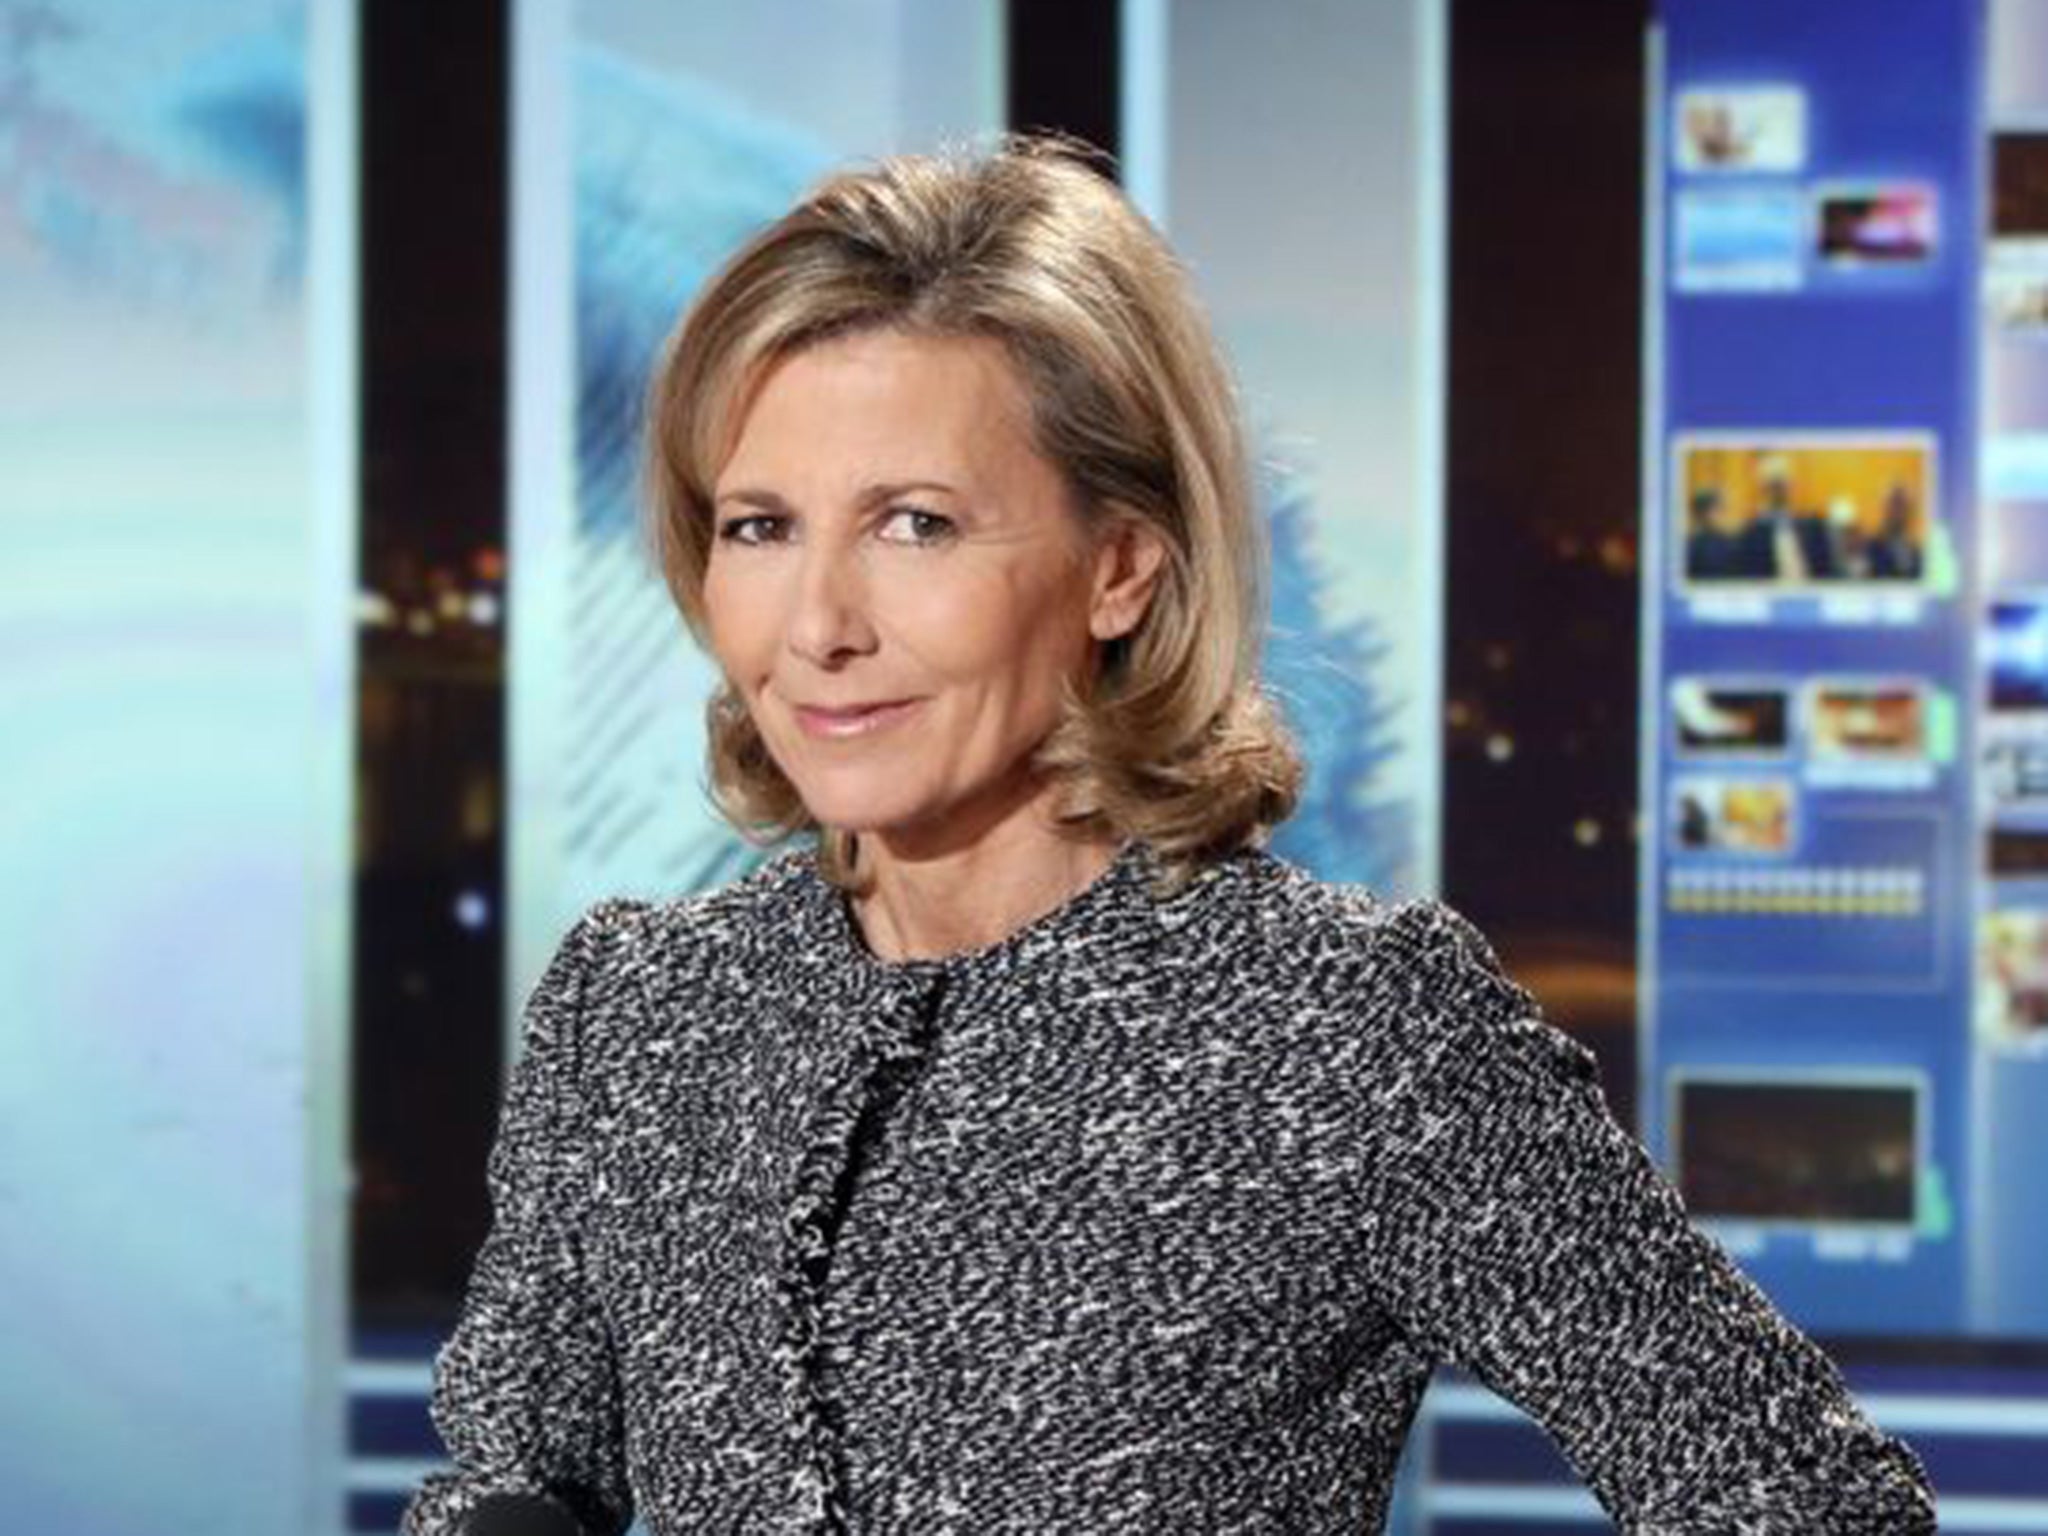 Claire Chazal, pictured before a news broadcast on channel TF1